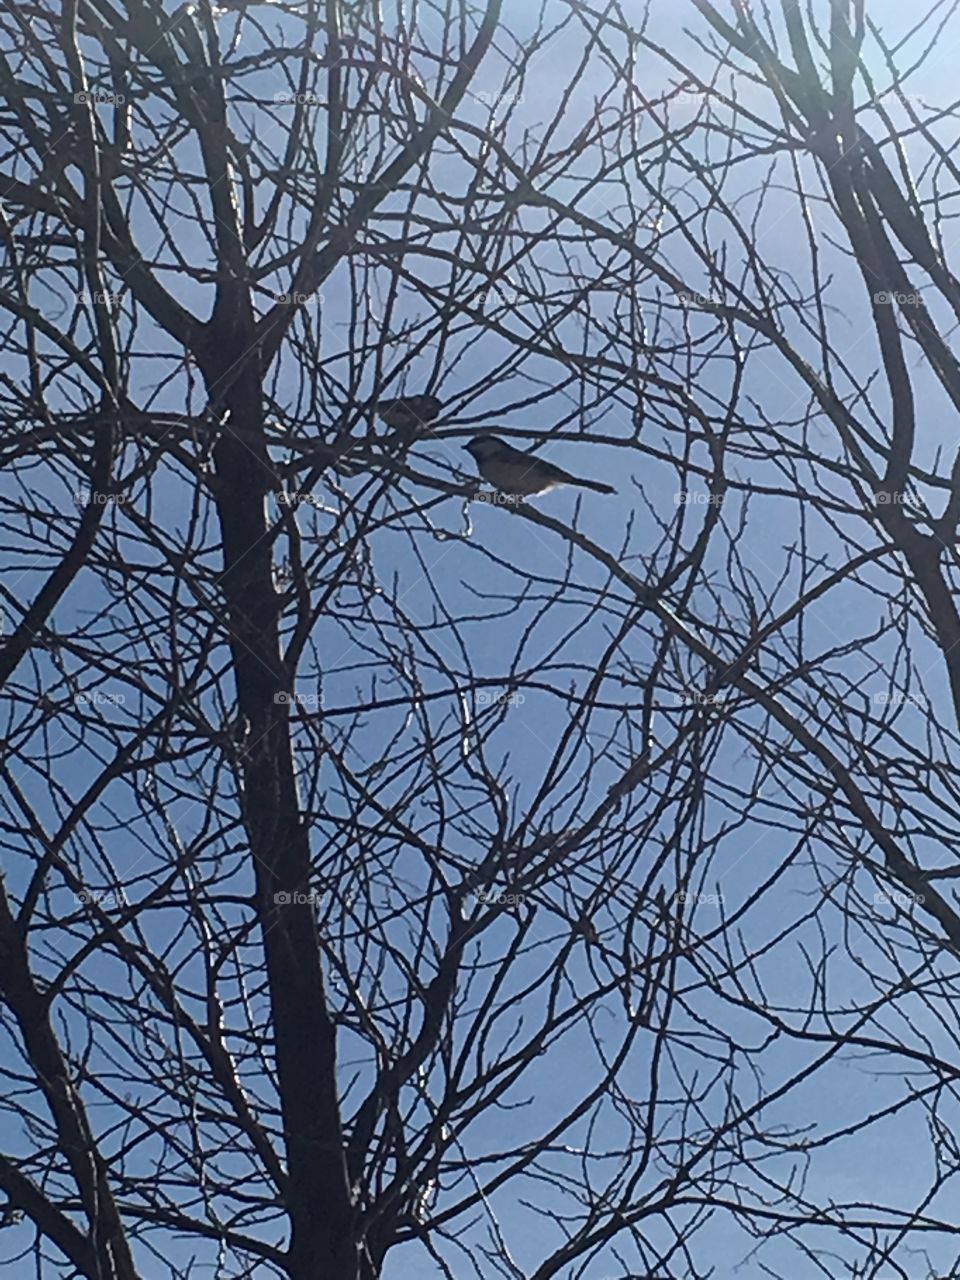 Two birds in a tree 